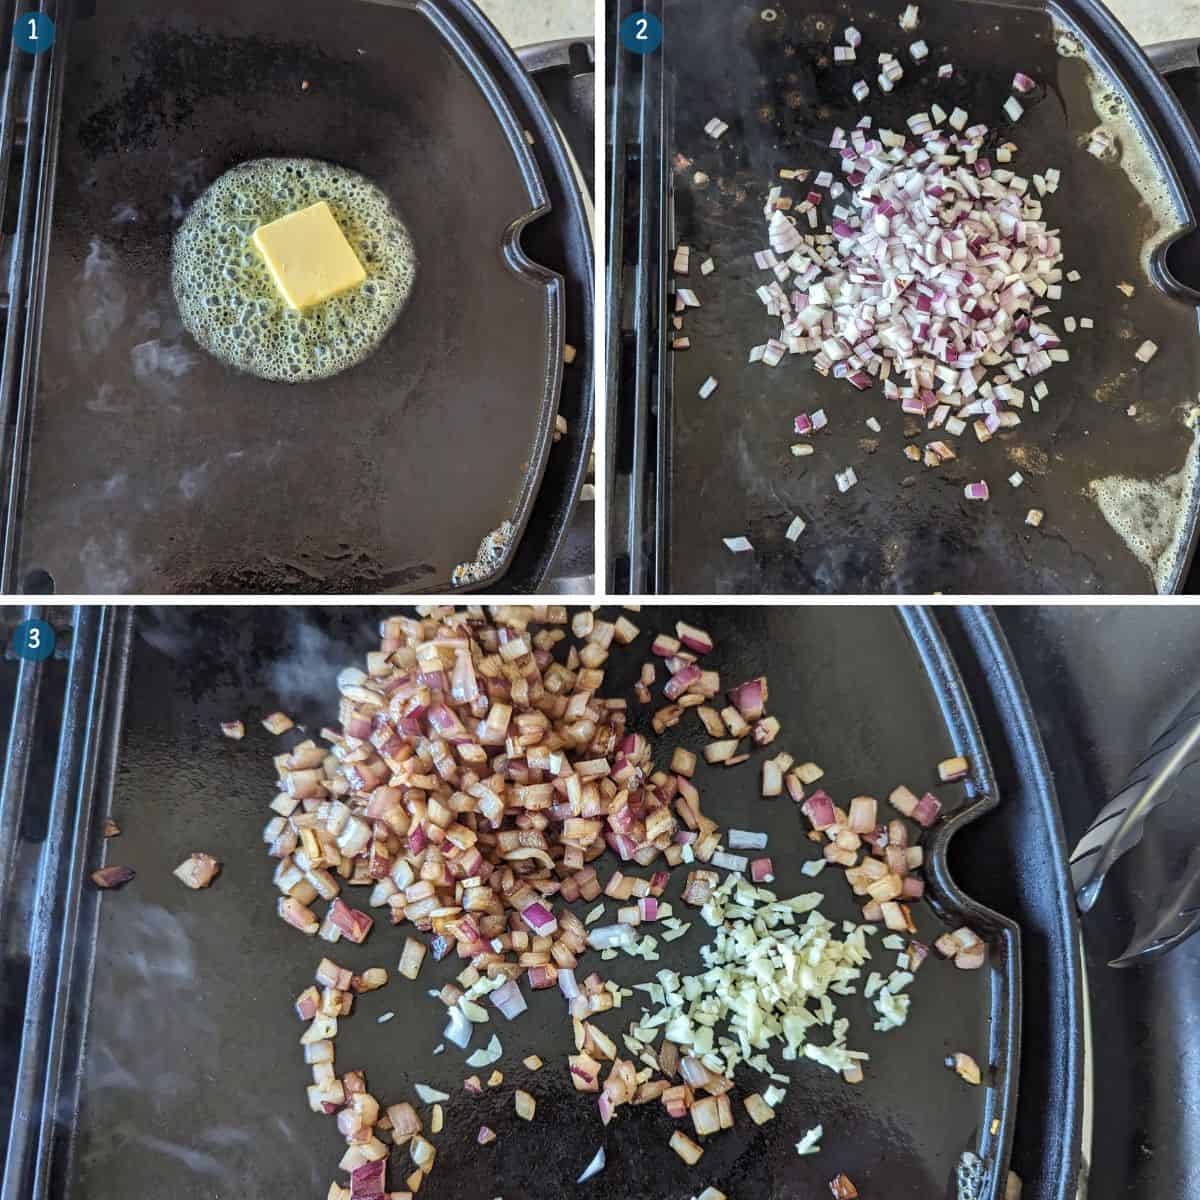 Adding onions and garlic to the Weber Q griddle